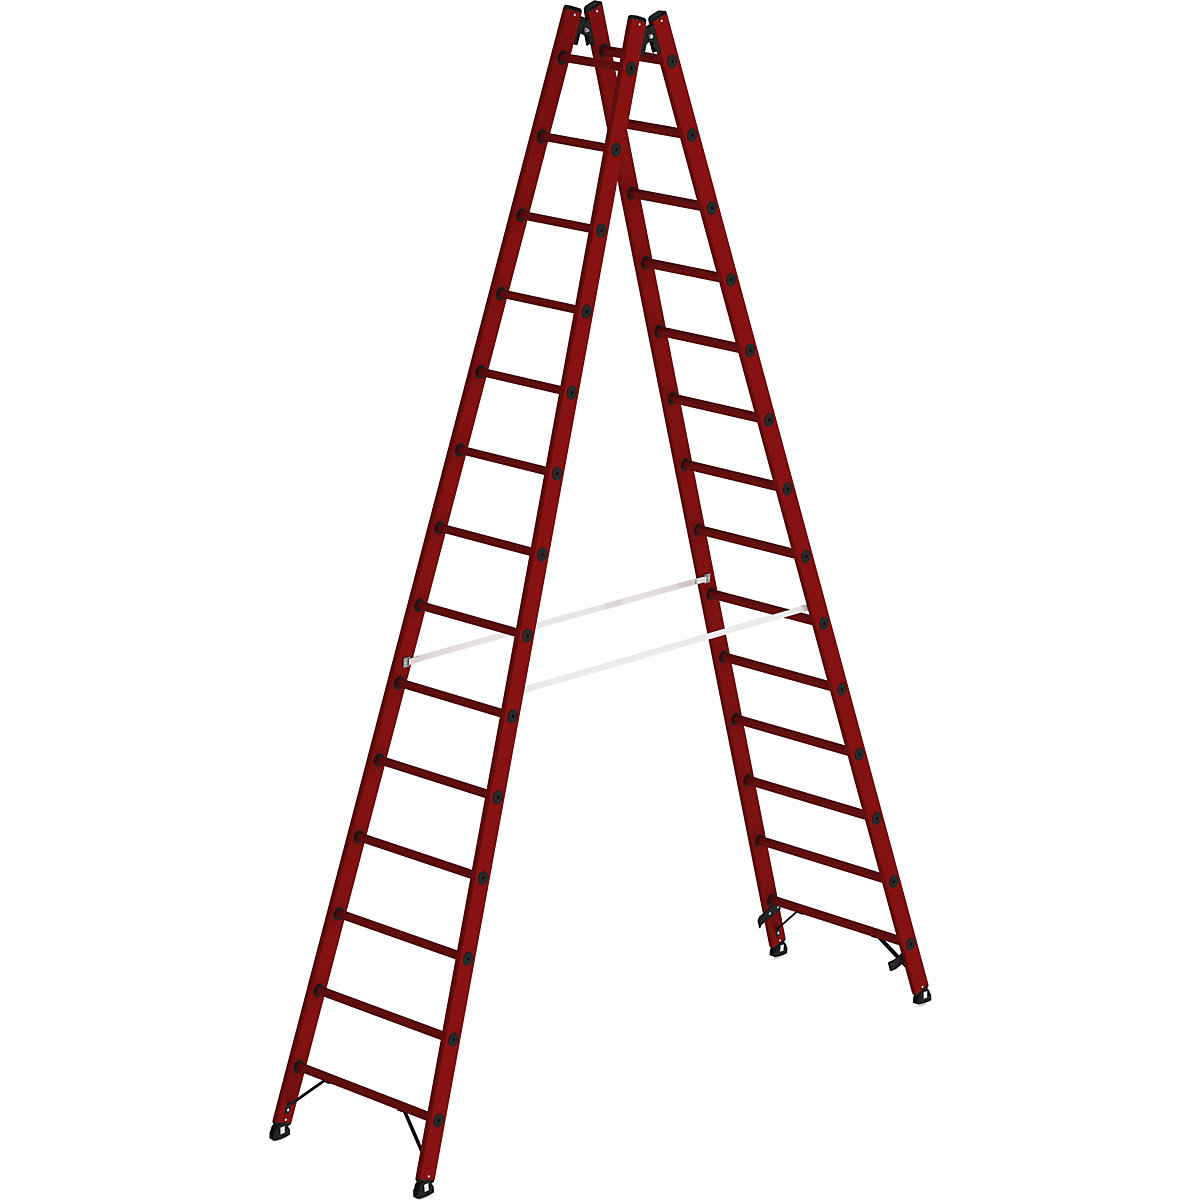 Solid plastic ladder – MUNK, made entirely of GRP, 2 x 14 rungs-9